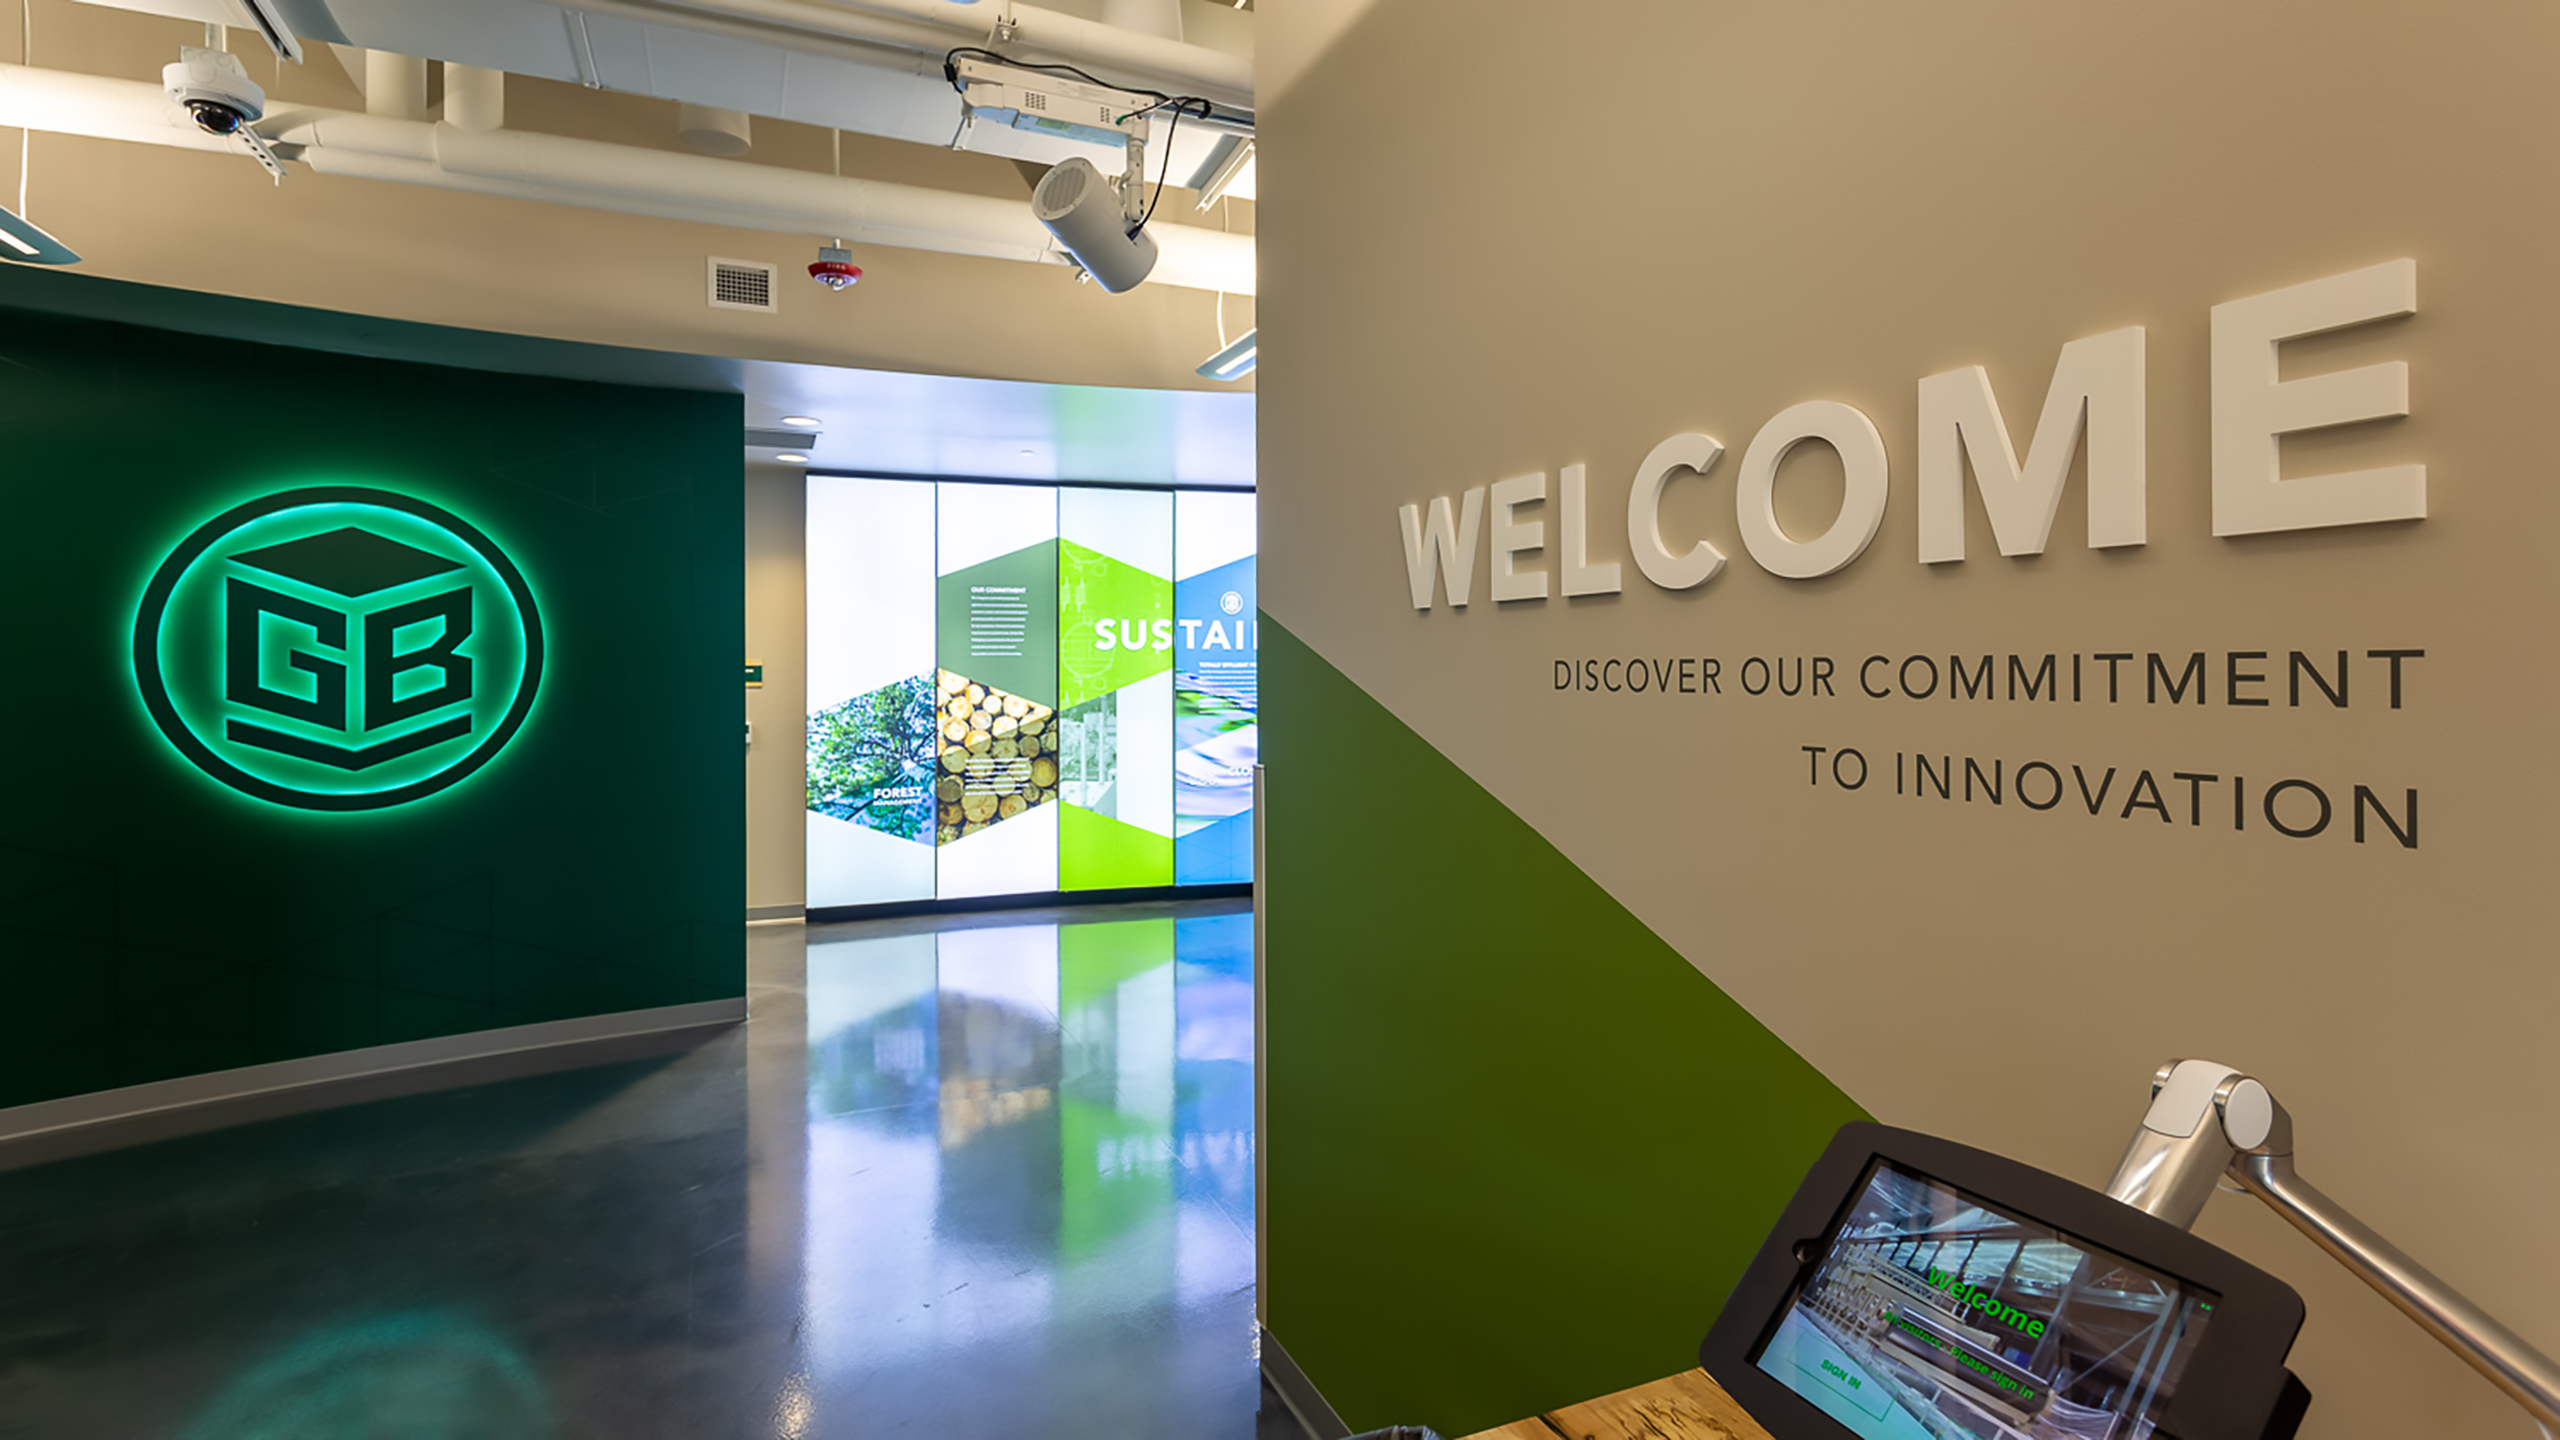 Green Bay Packaging Welcome Entry Wall Backlit Dimensional